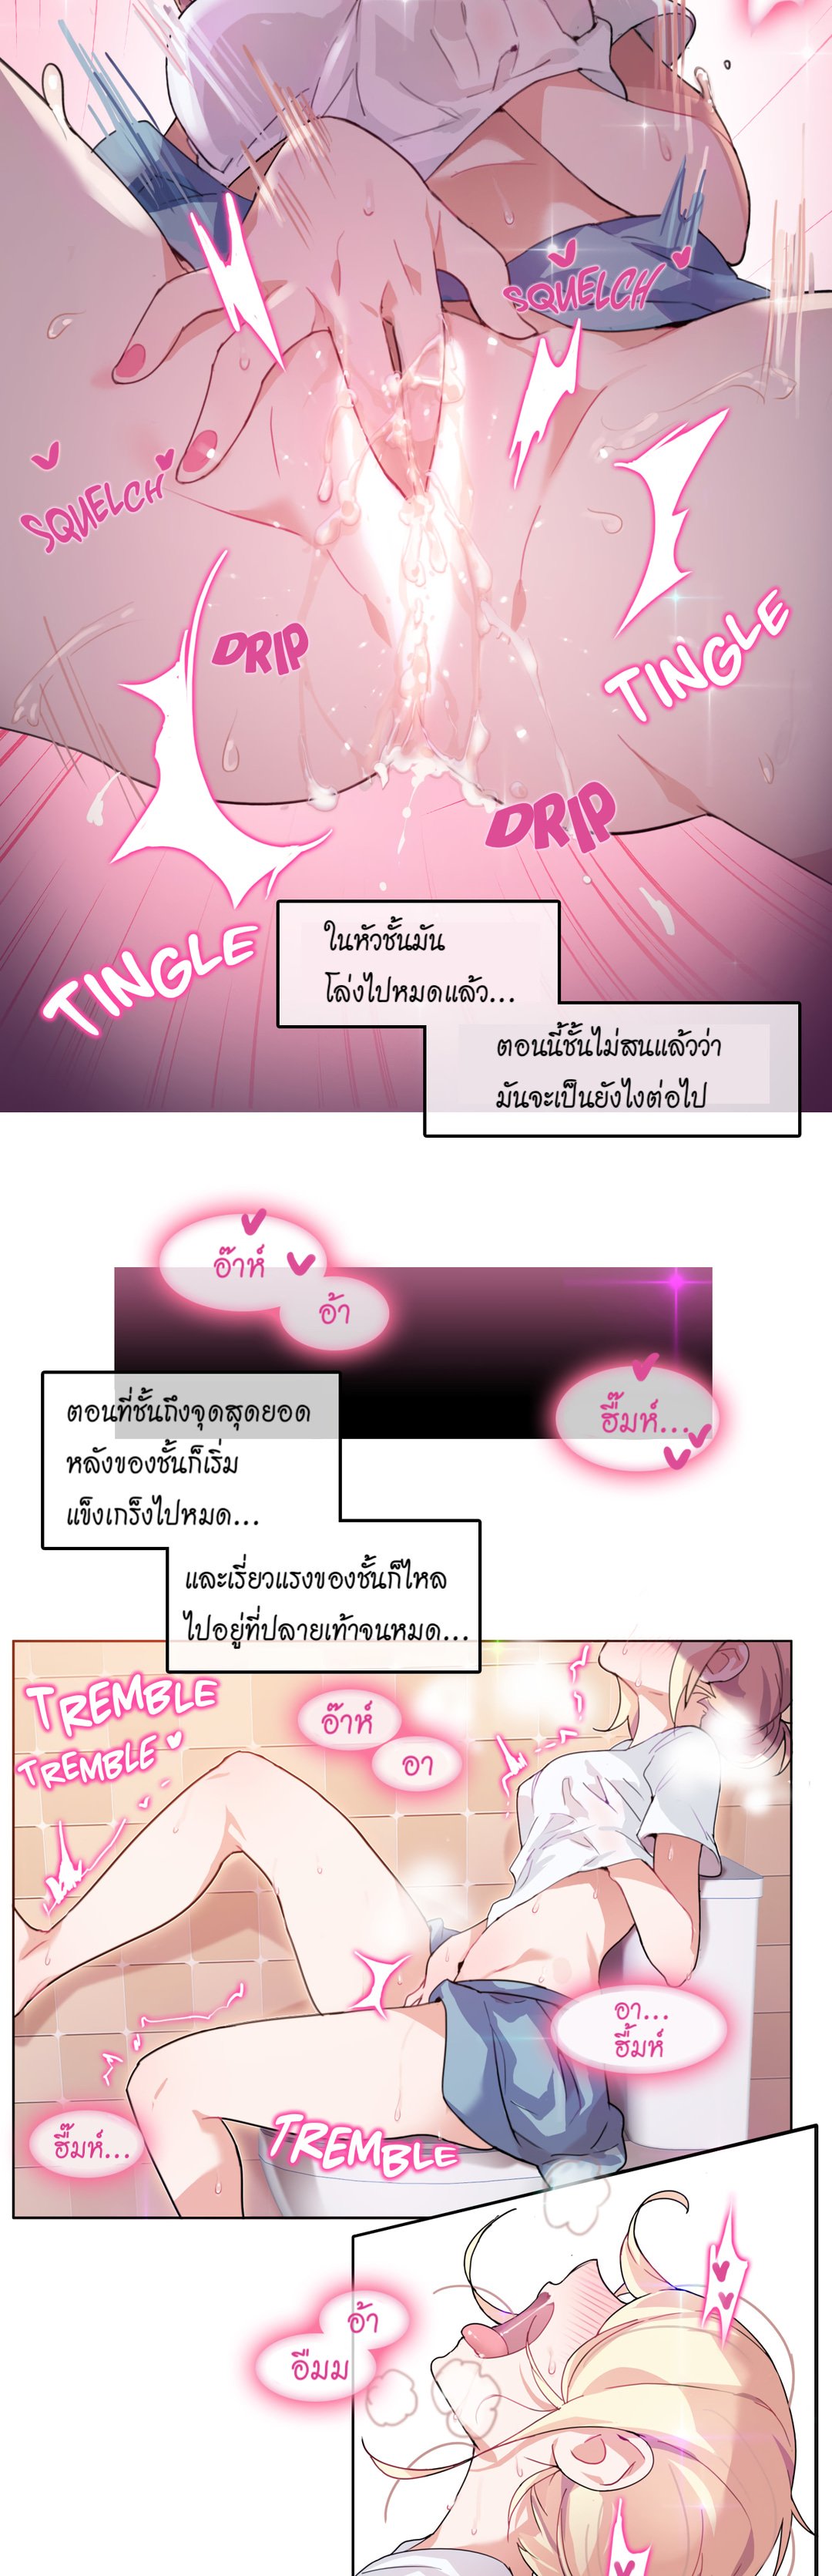 A Pervert’s Daily Life 2 (12)